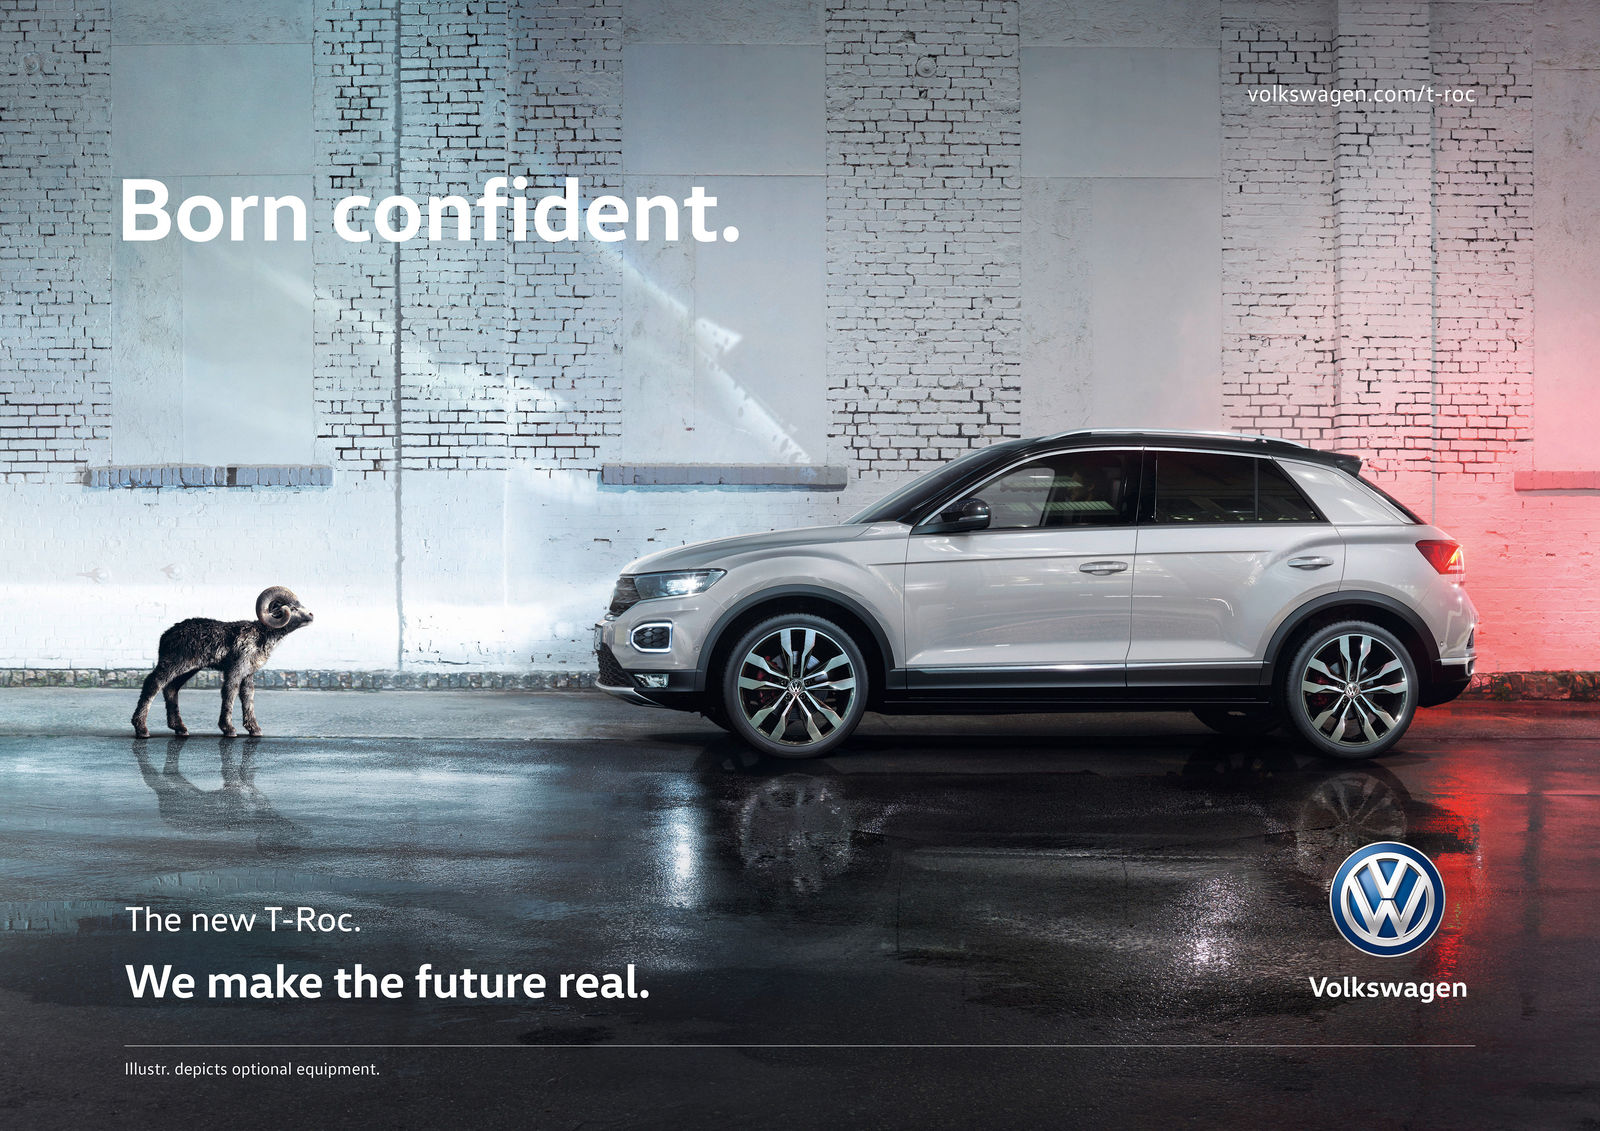 Volkswagen launches international marketing campaign for new T-Roc